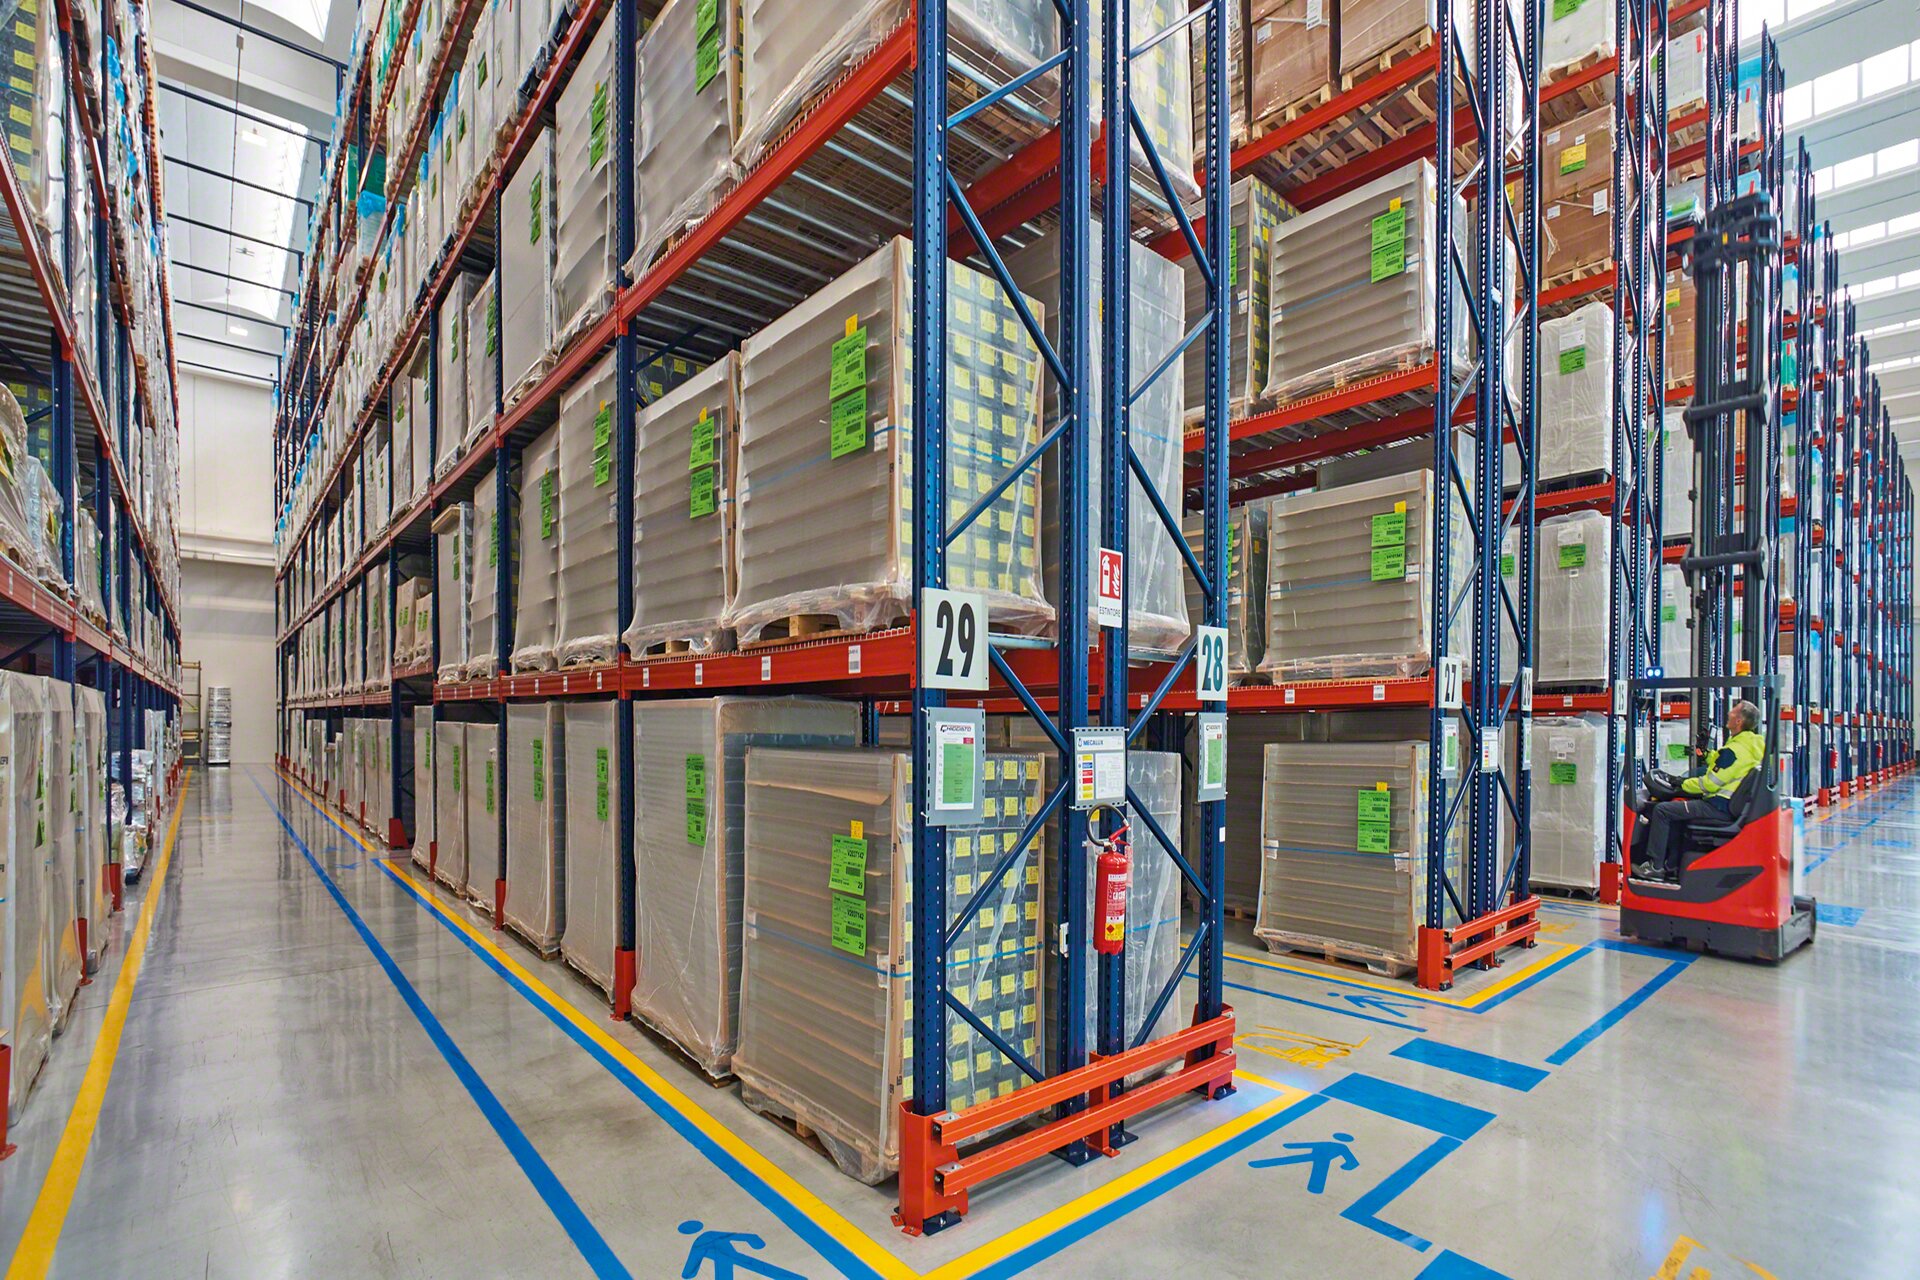 Signalling varies in the warehouse aisles and increases operator safety